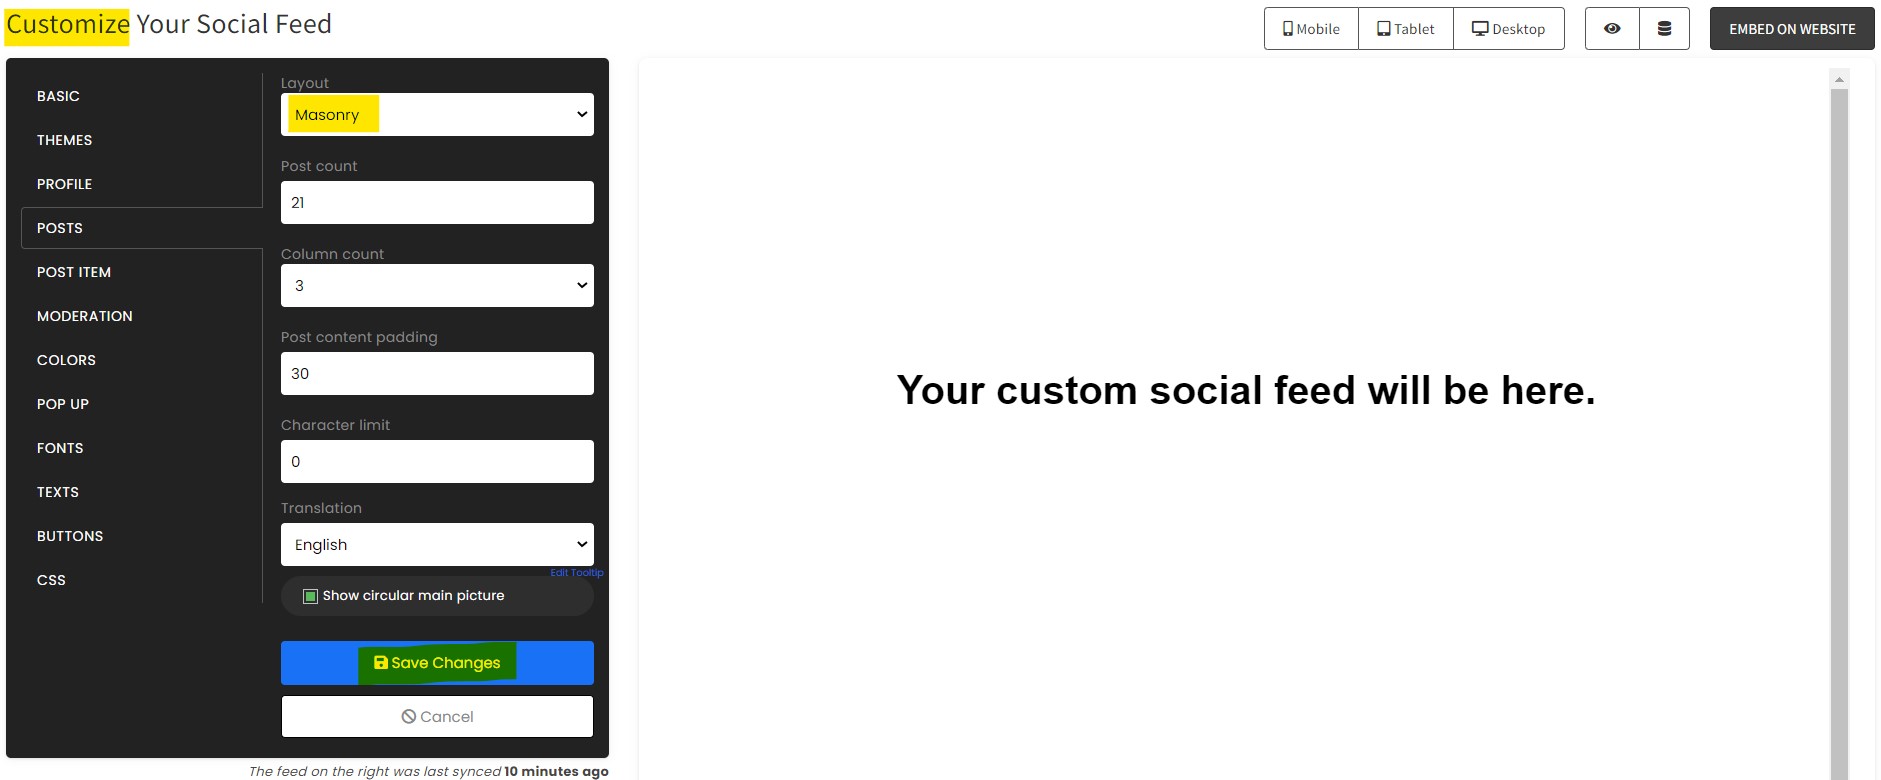 Customize your feed - How to embed Twitter feed on your Wix website for FREE?